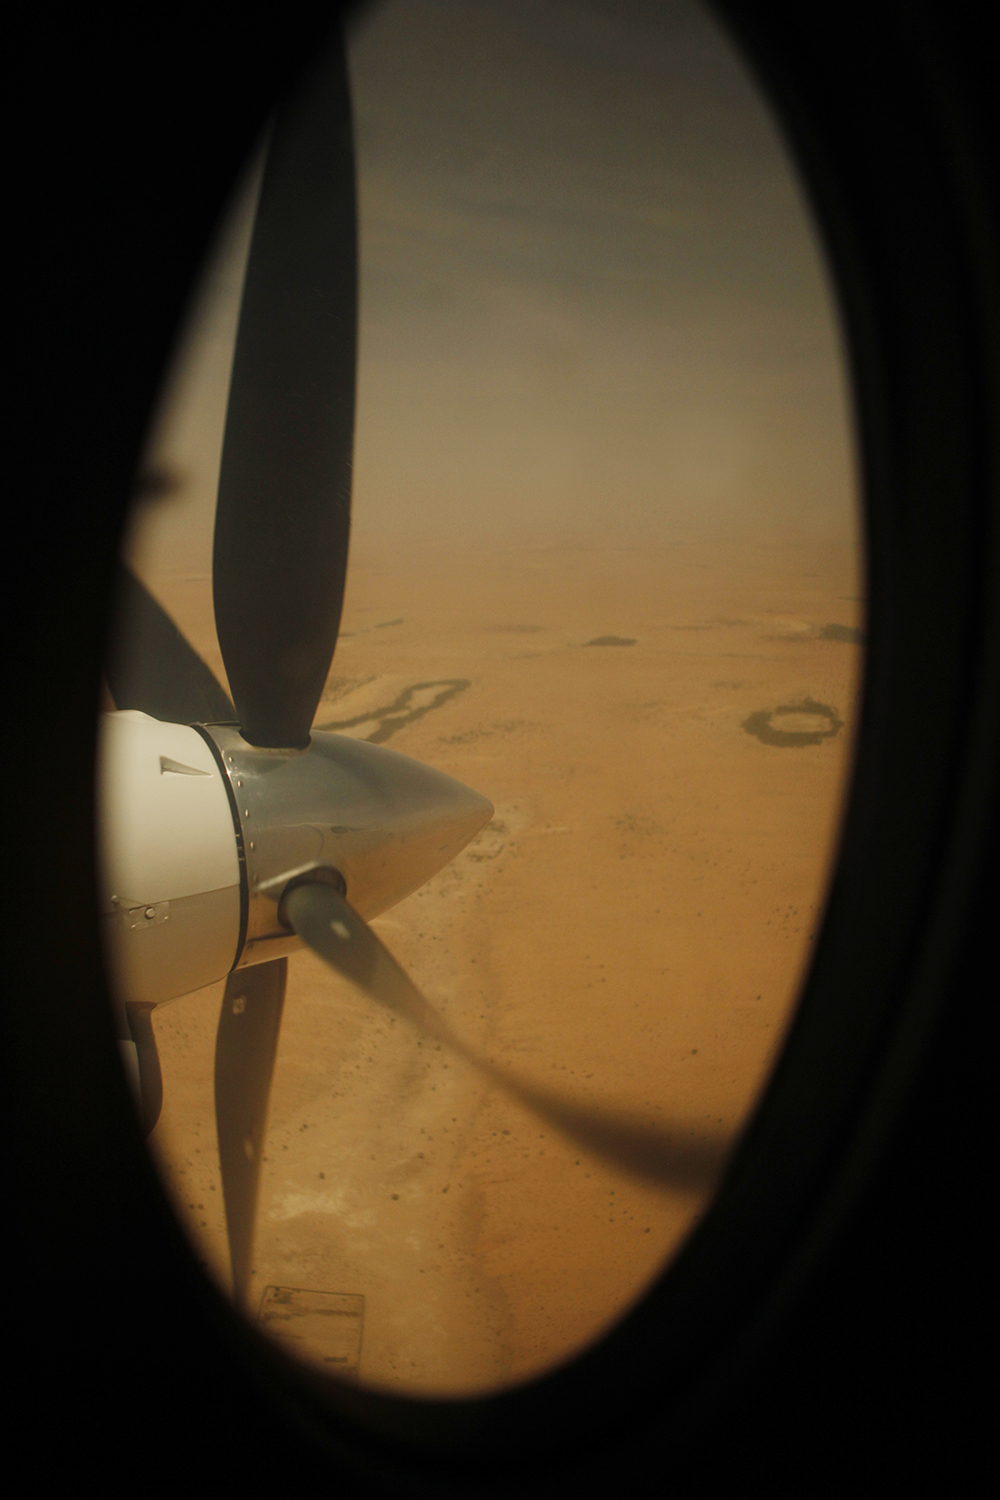 Crossing the Sahel - Keira Knightley's visit to Chad for UNICEF